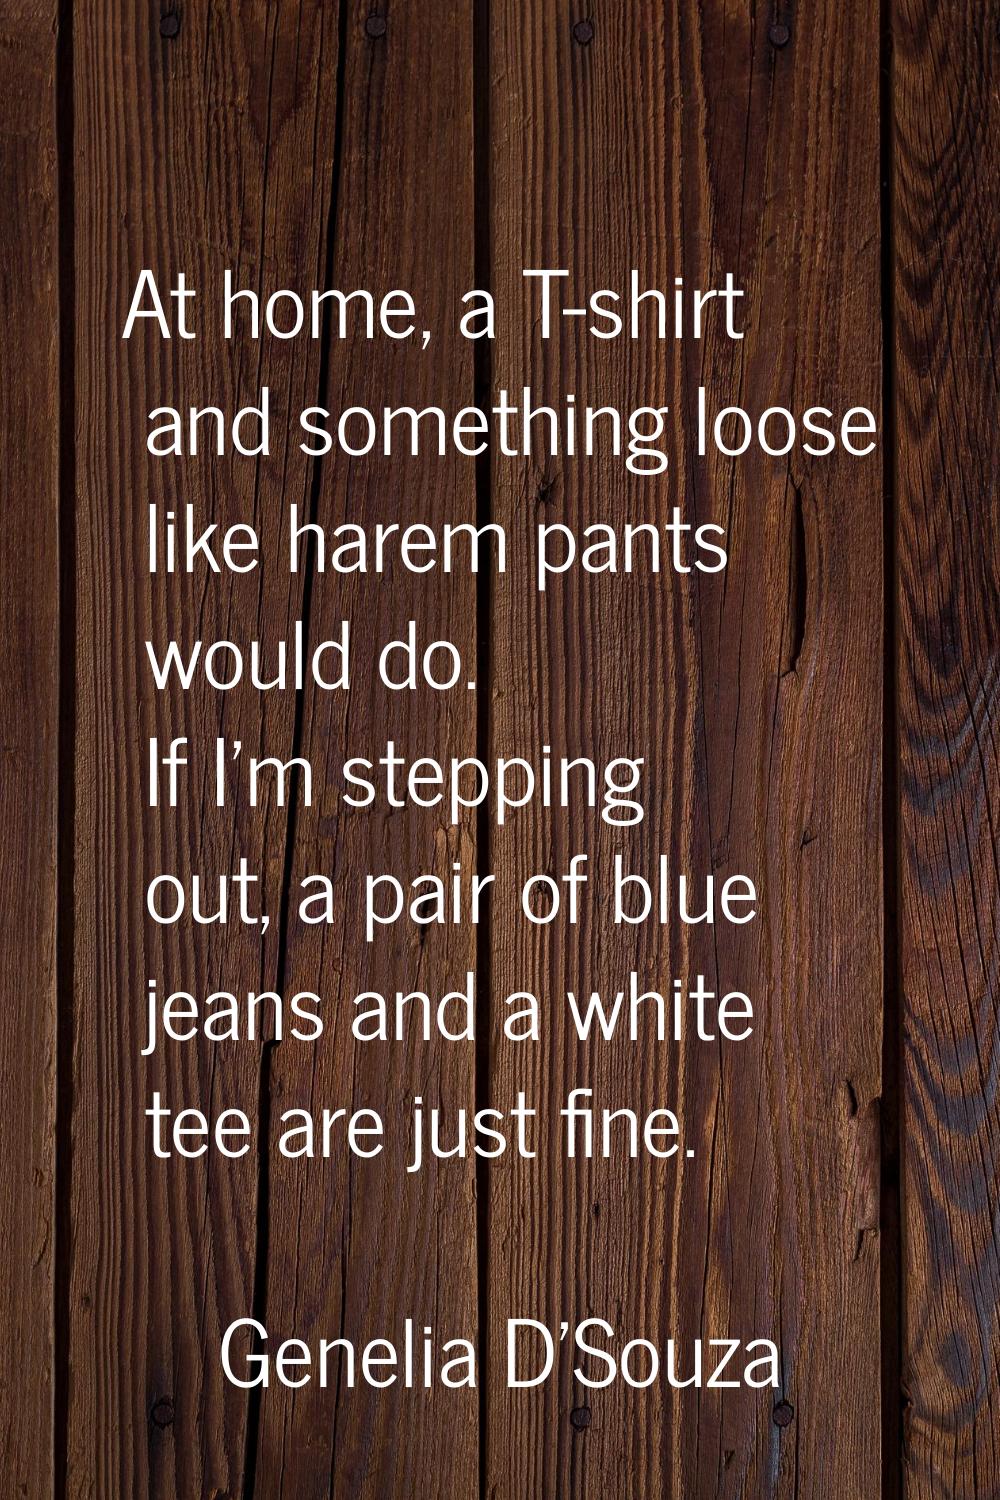 At home, a T-shirt and something loose like harem pants would do. If I'm stepping out, a pair of bl